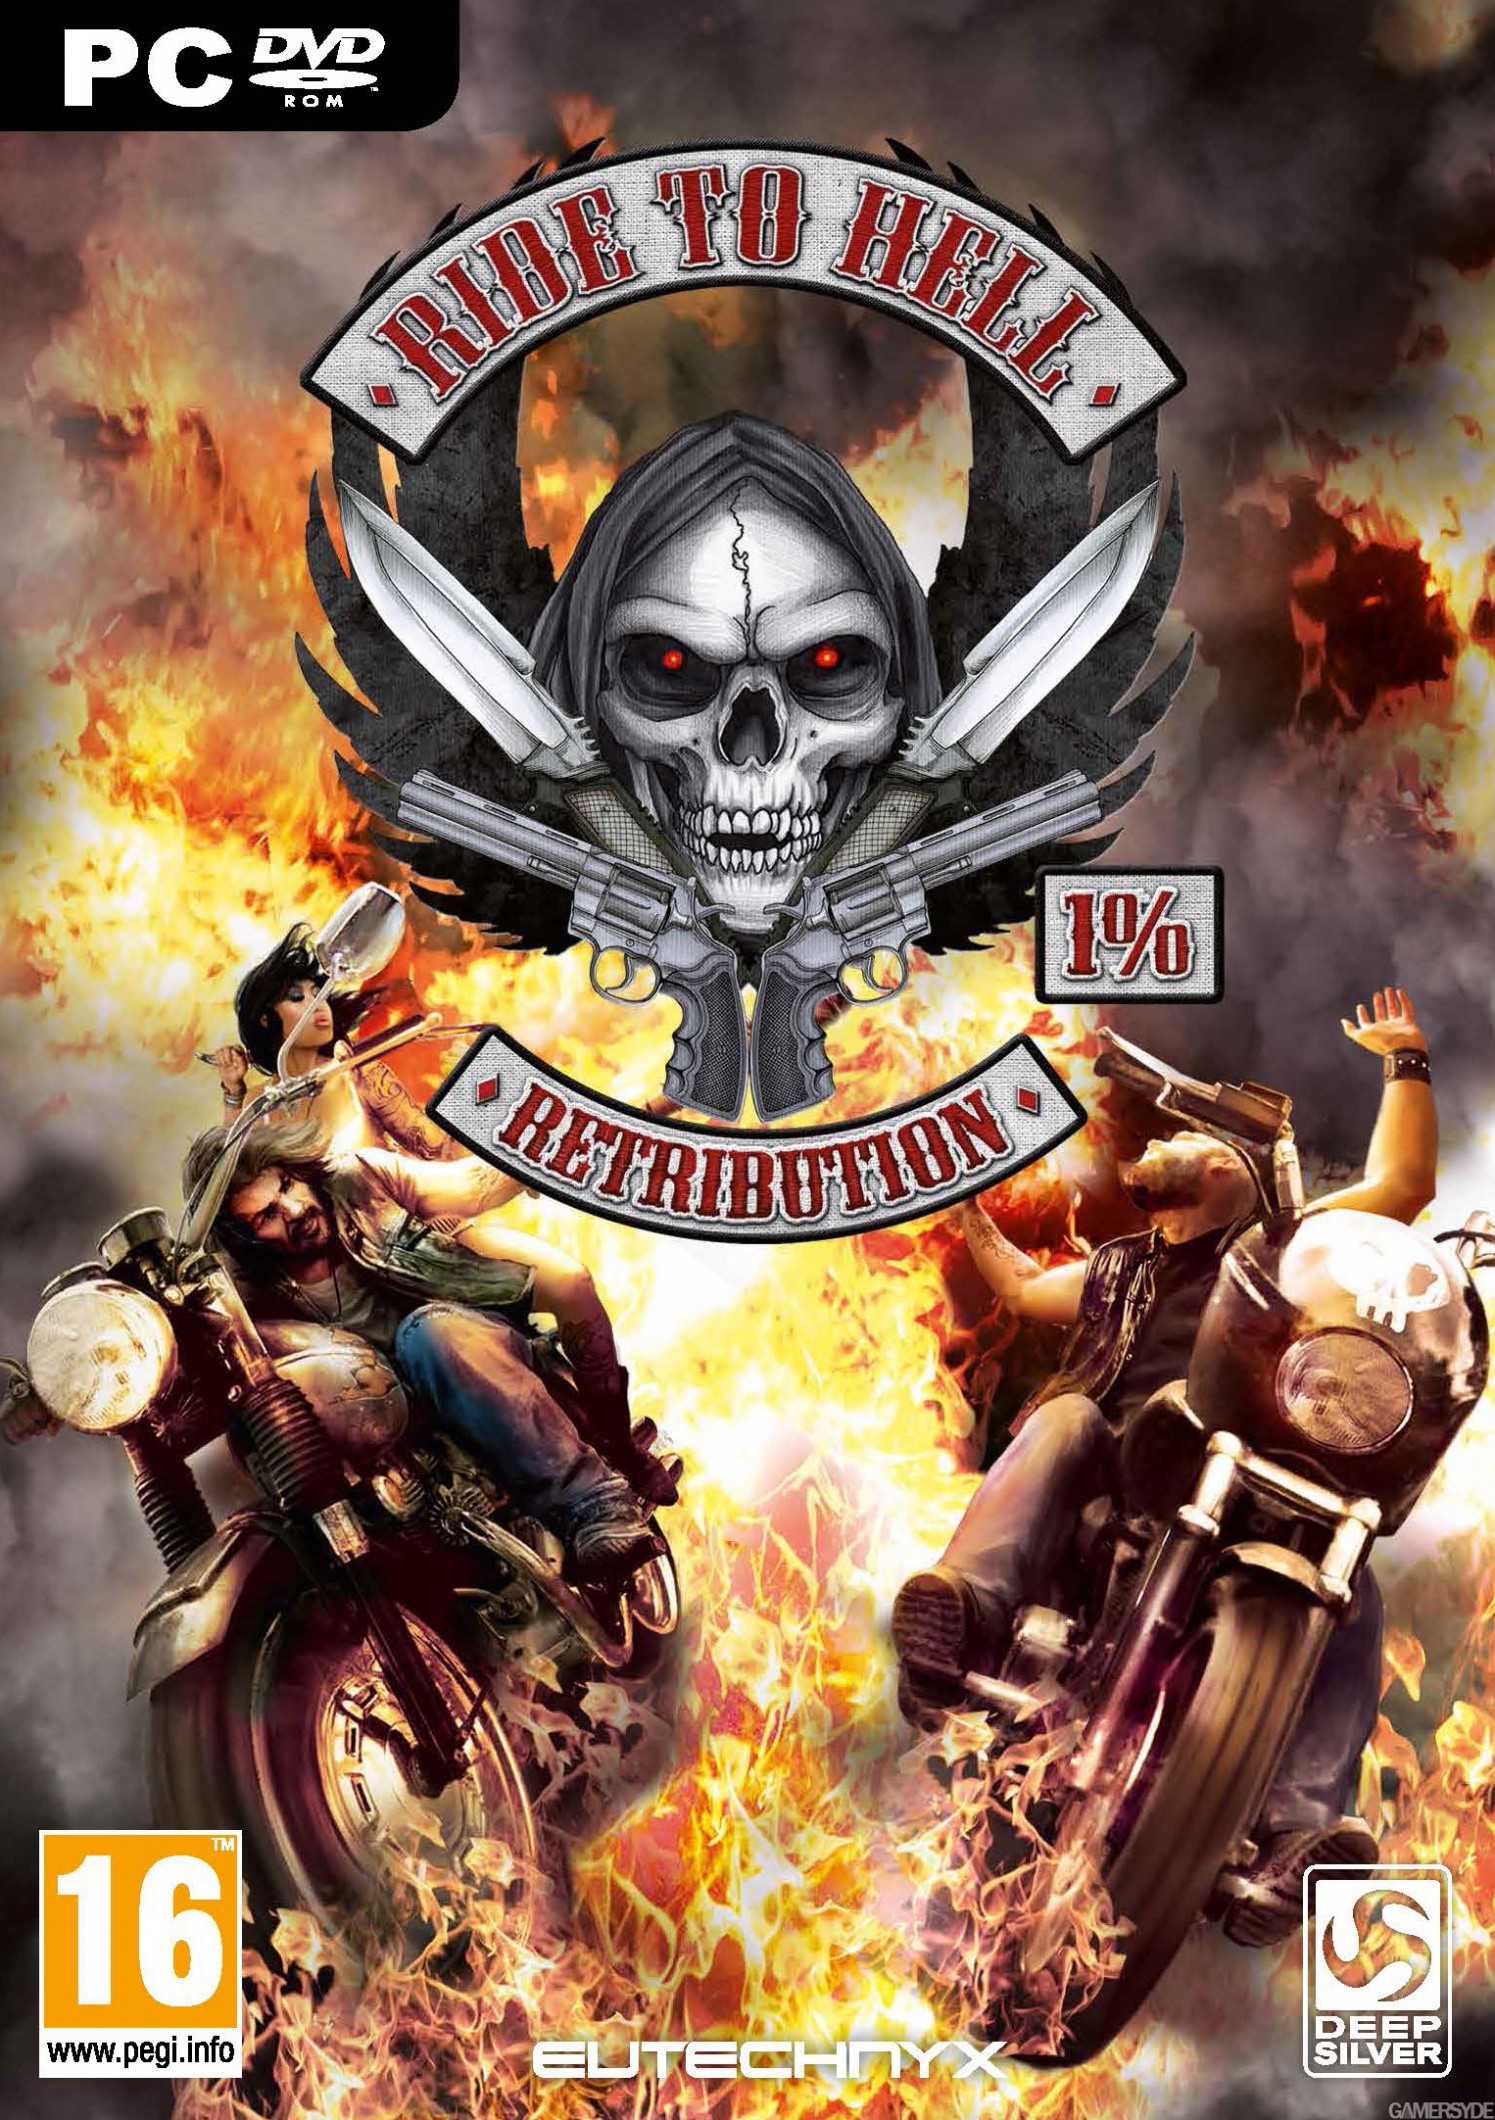 retribution ride to hell download free